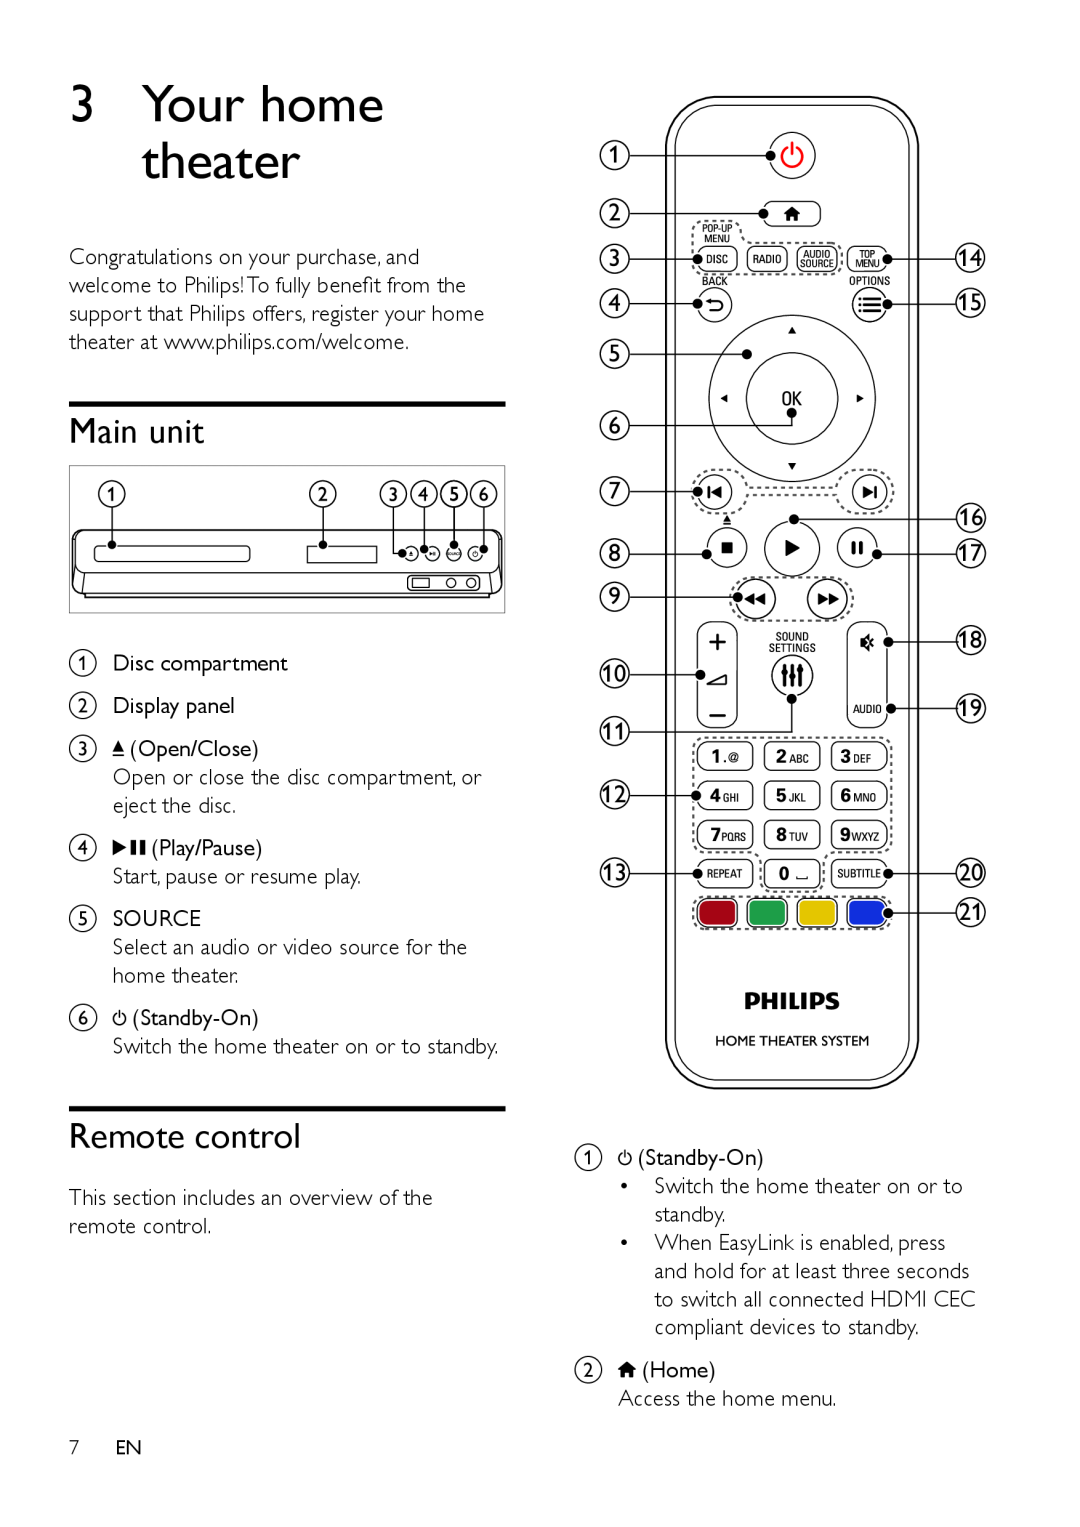 Philips HTS3541 user manual Main unit, Remote control, 3Your home theater 